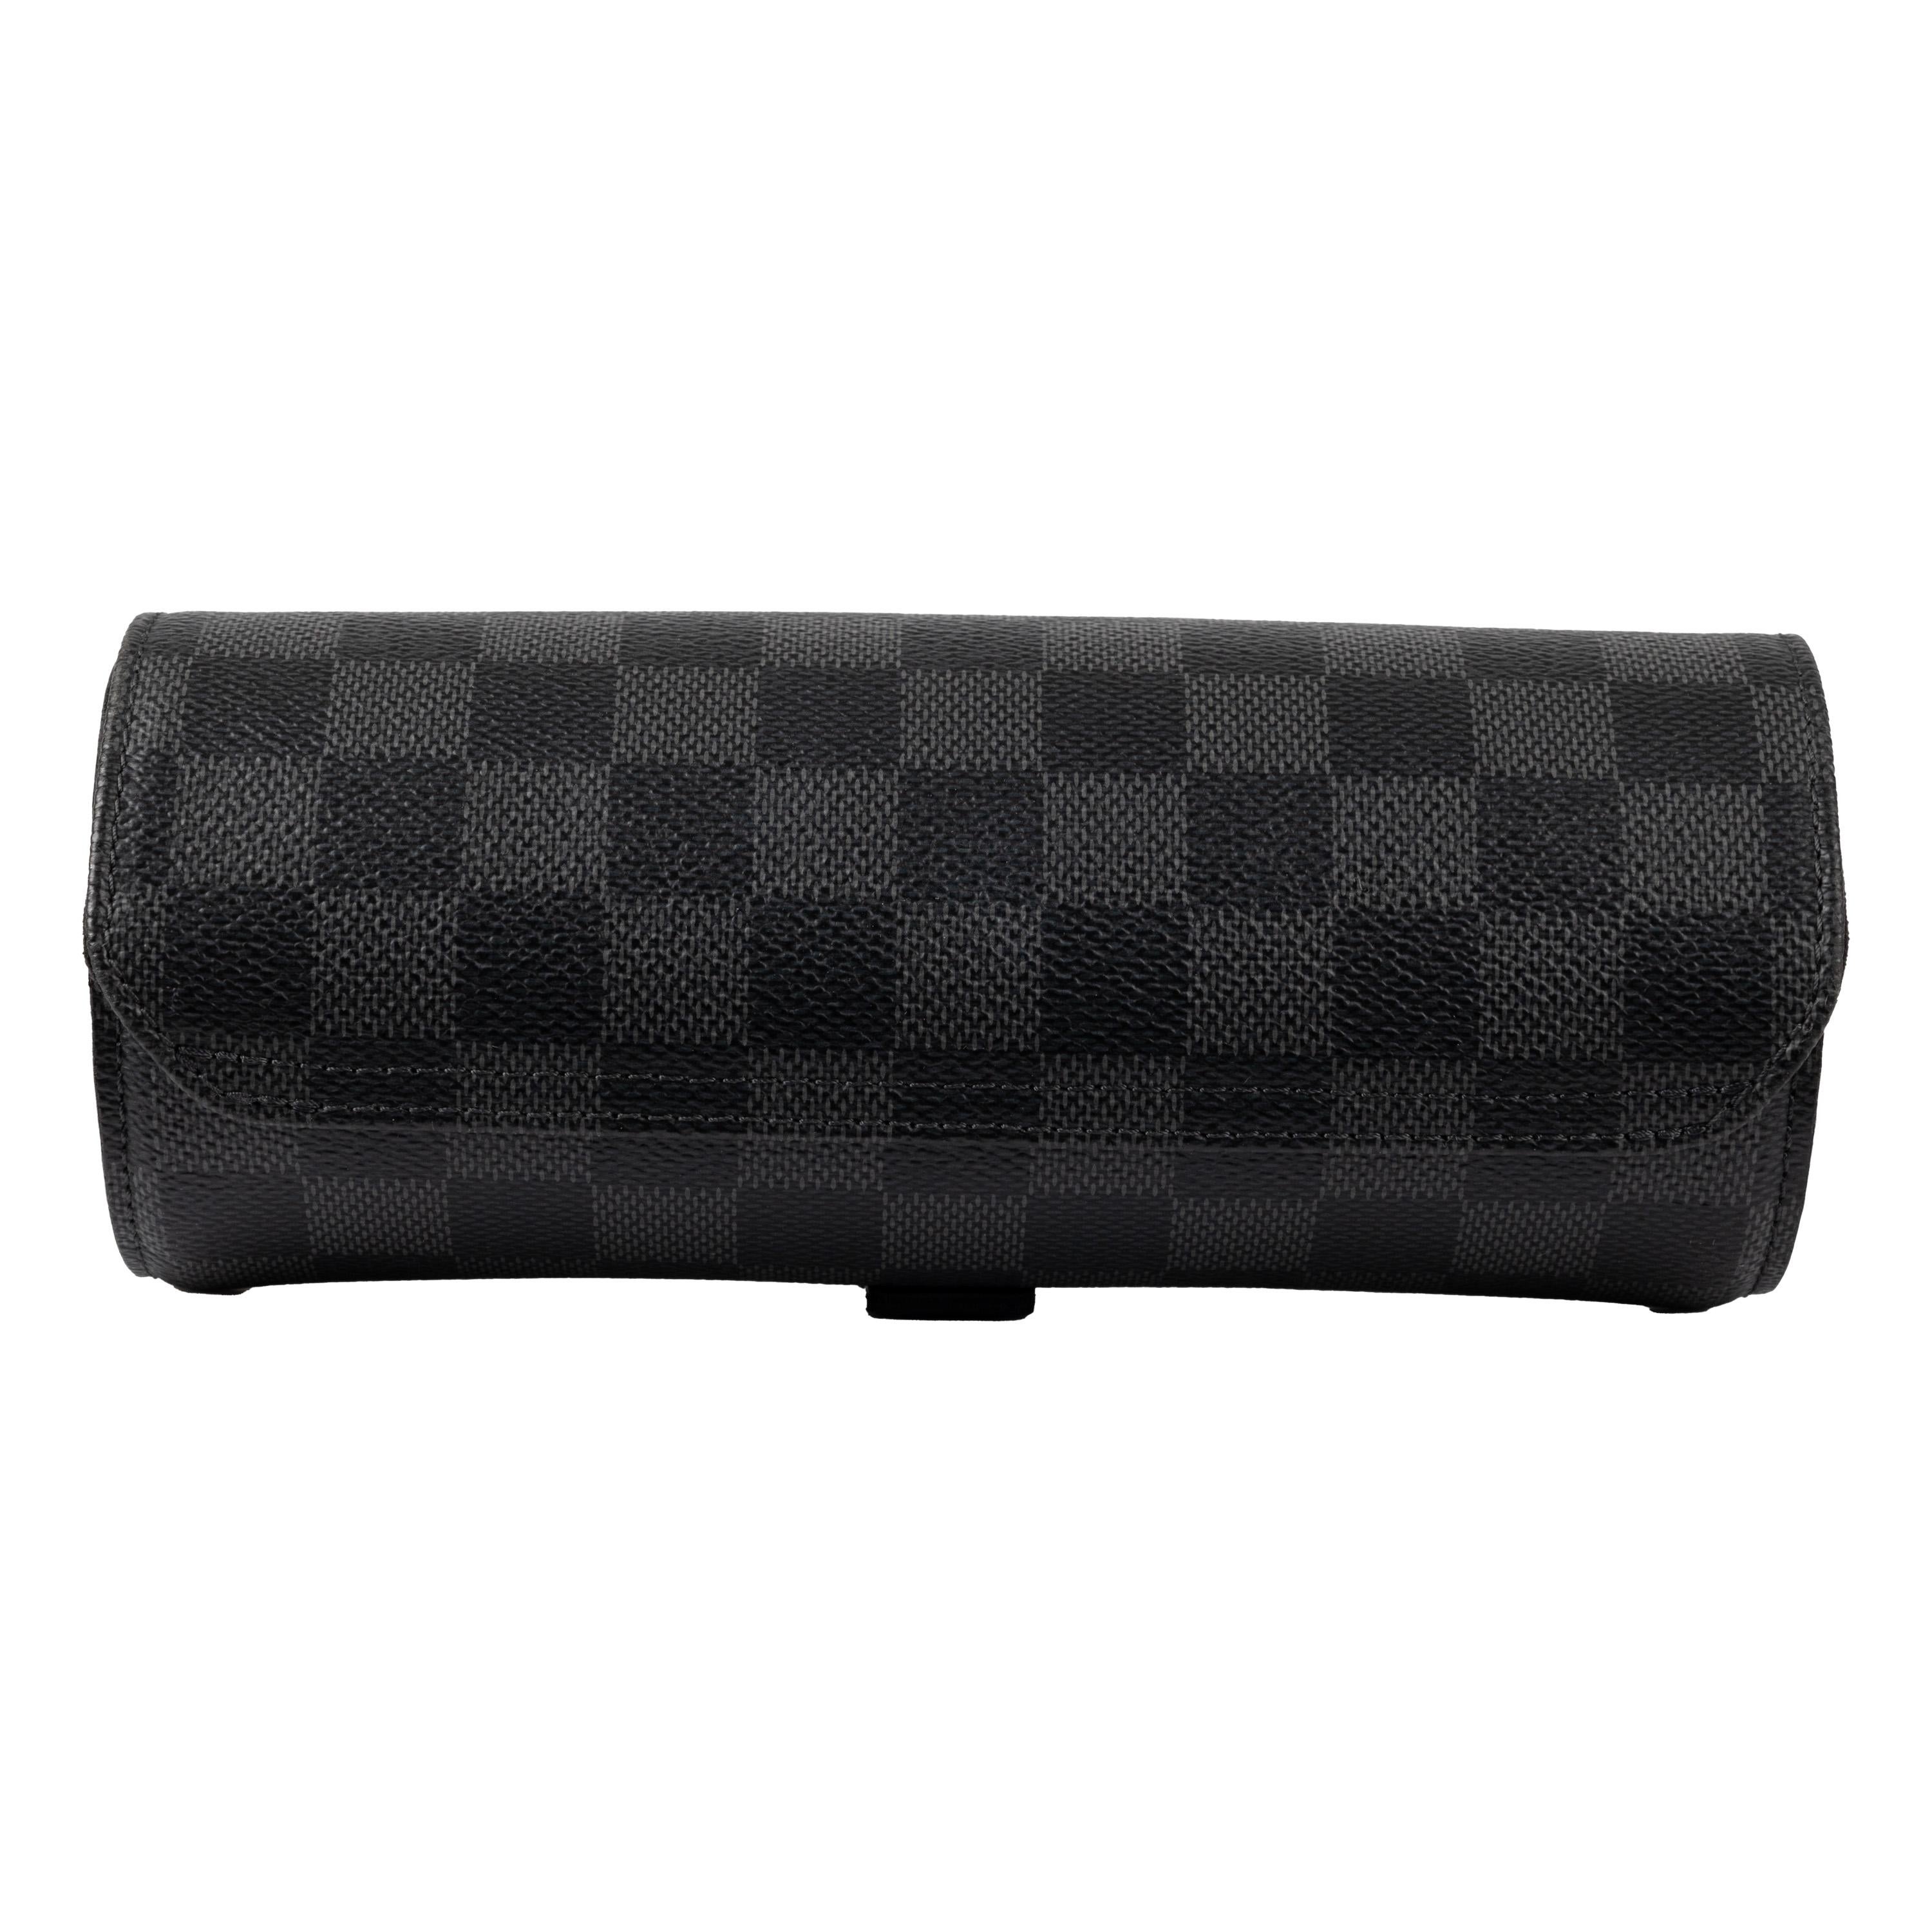 Louis Vuitton Damier Graphite 3 Watch Travel Case In Excellent Condition For Sale In Milano, IT